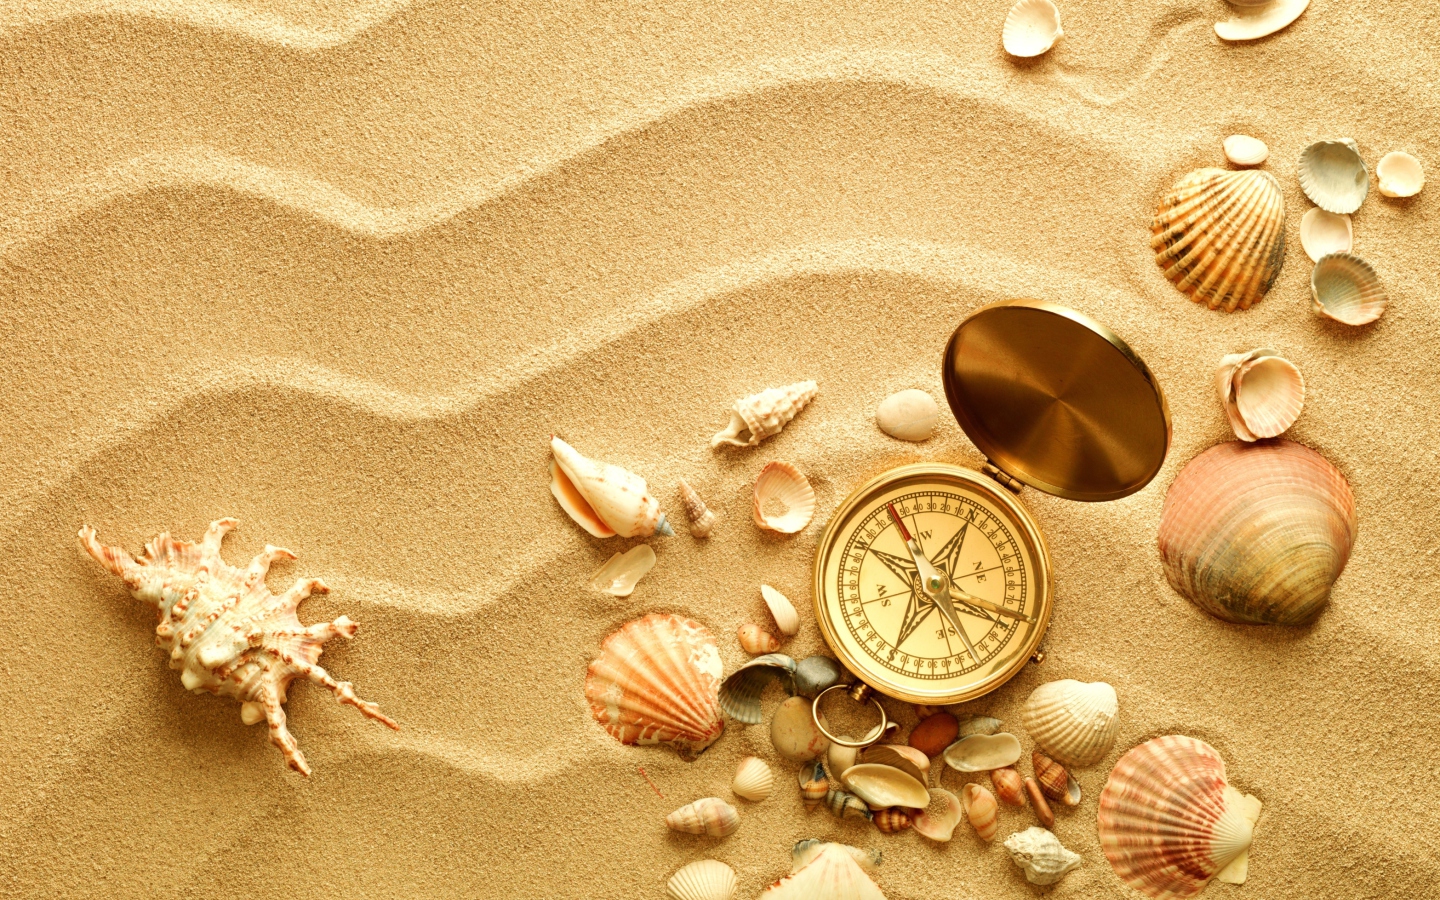 Compass And Shells On Sand wallpaper 1440x900